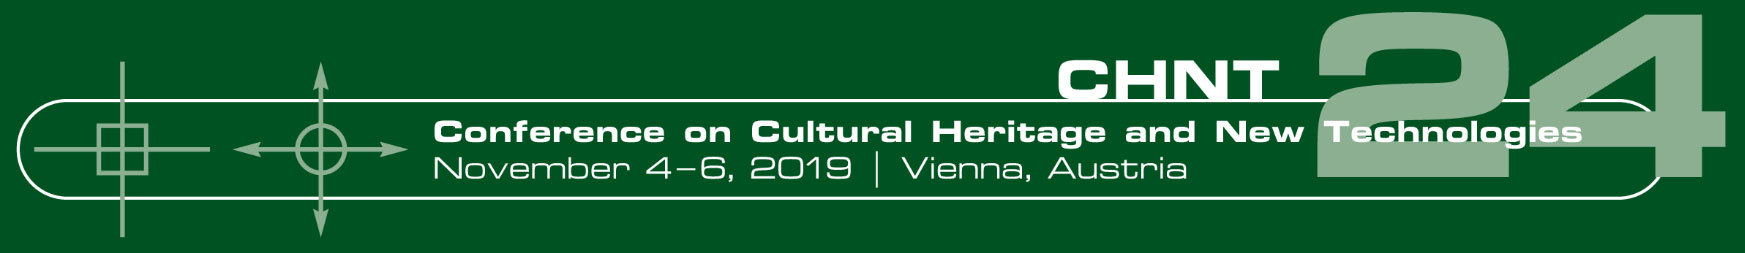 Conference on Cultural Heritage and New Technologies